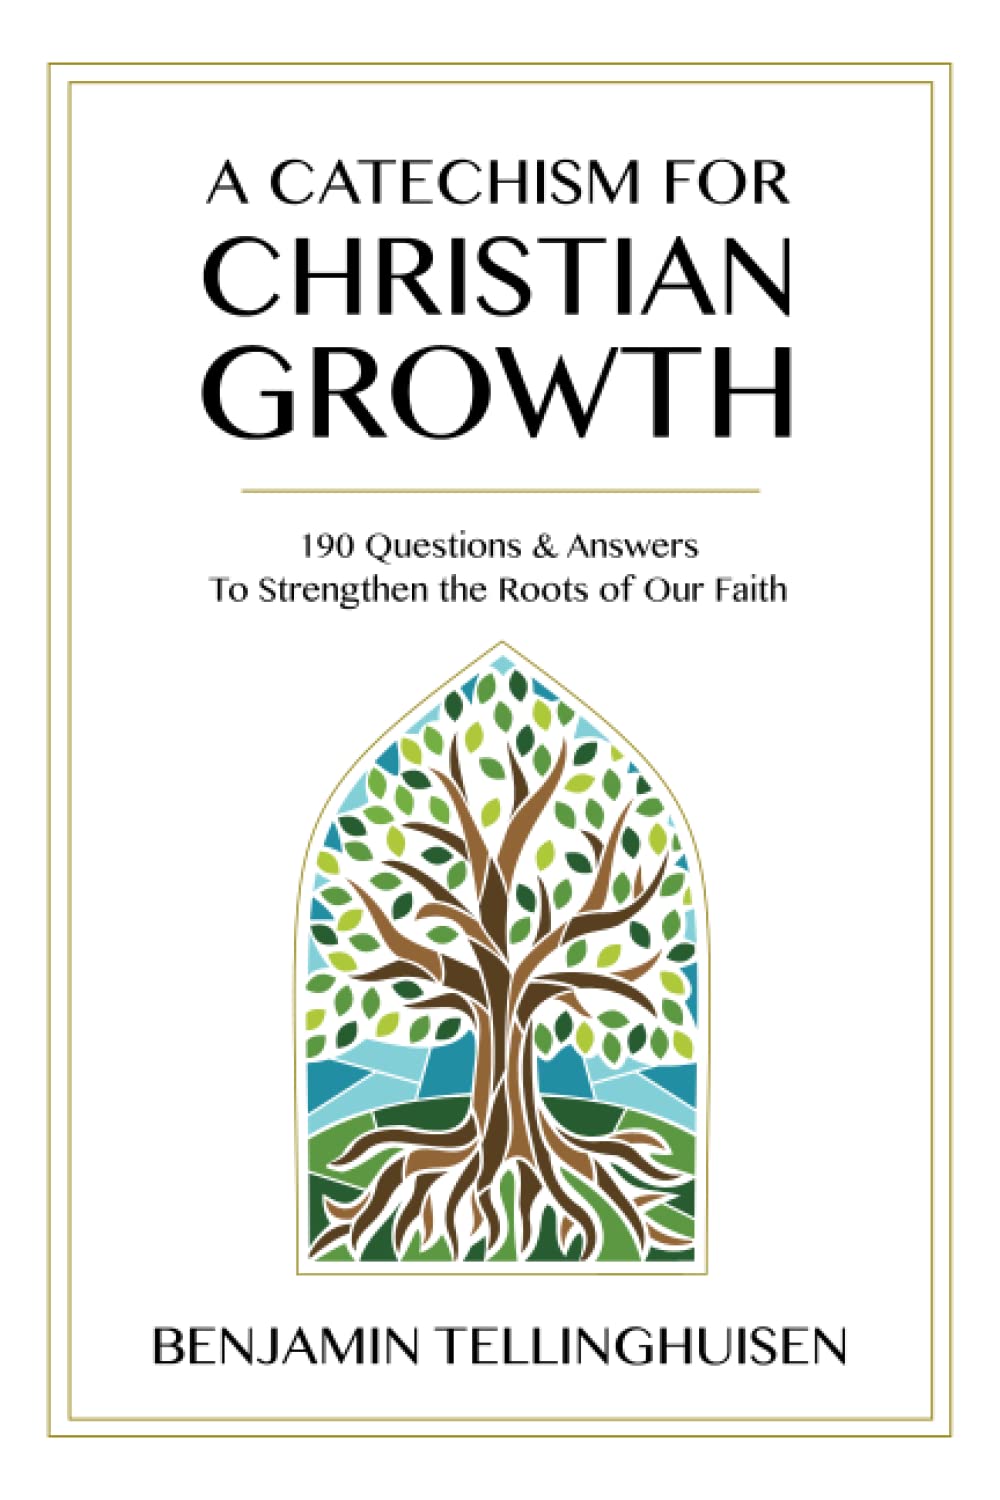 A Catechism for Christian Growth: 190 Questions and Answers to Strengthen the Roots of Our Faith